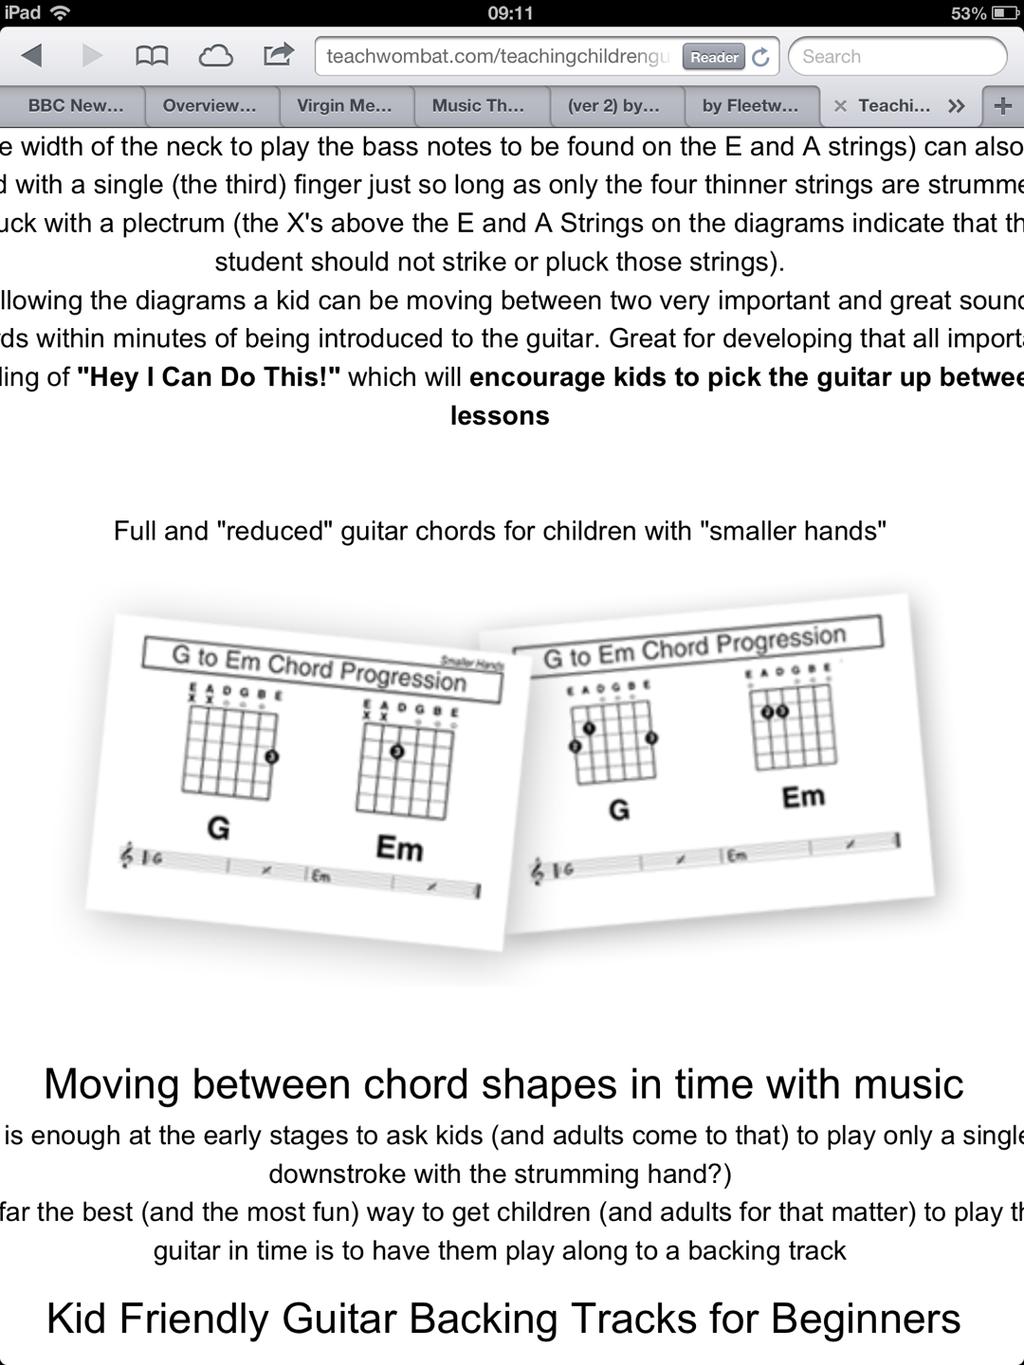 Teaching Kids Guitar From The Start A quick guide to using the teachwombat.